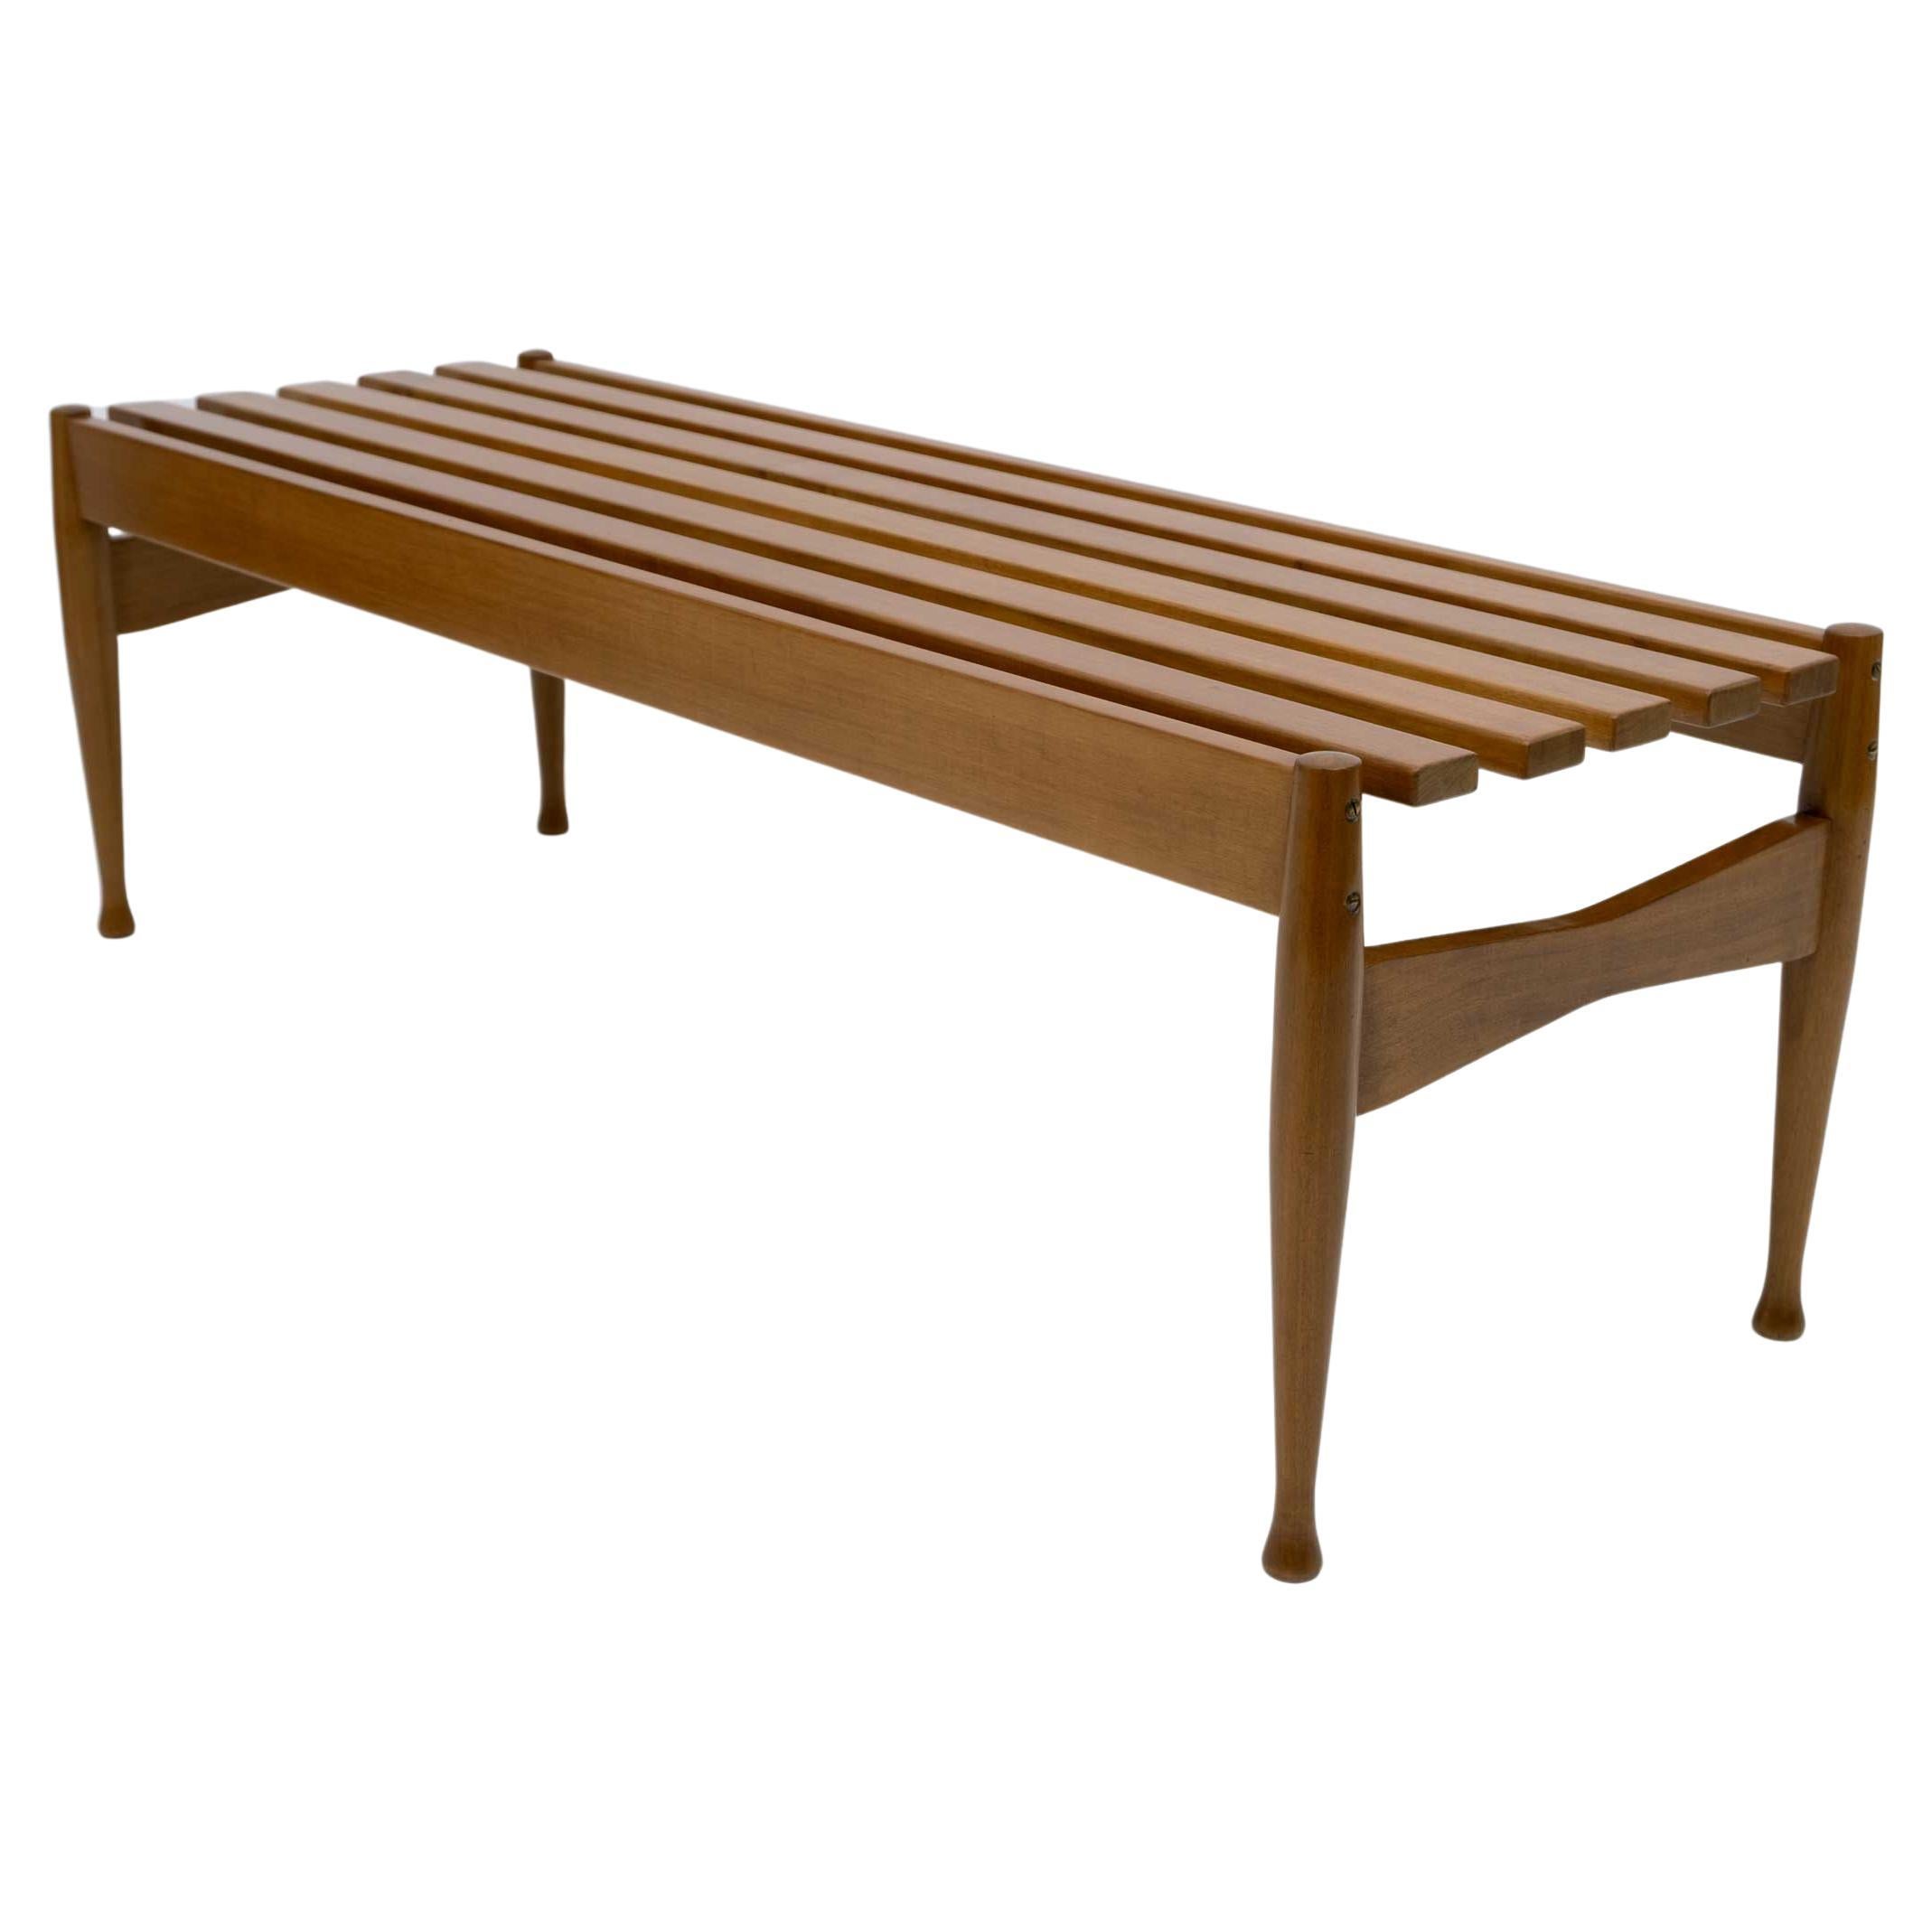 Attributed Giò Ponti Mid-century Modern Italian Bench for Fratelli Reguitti, 50s